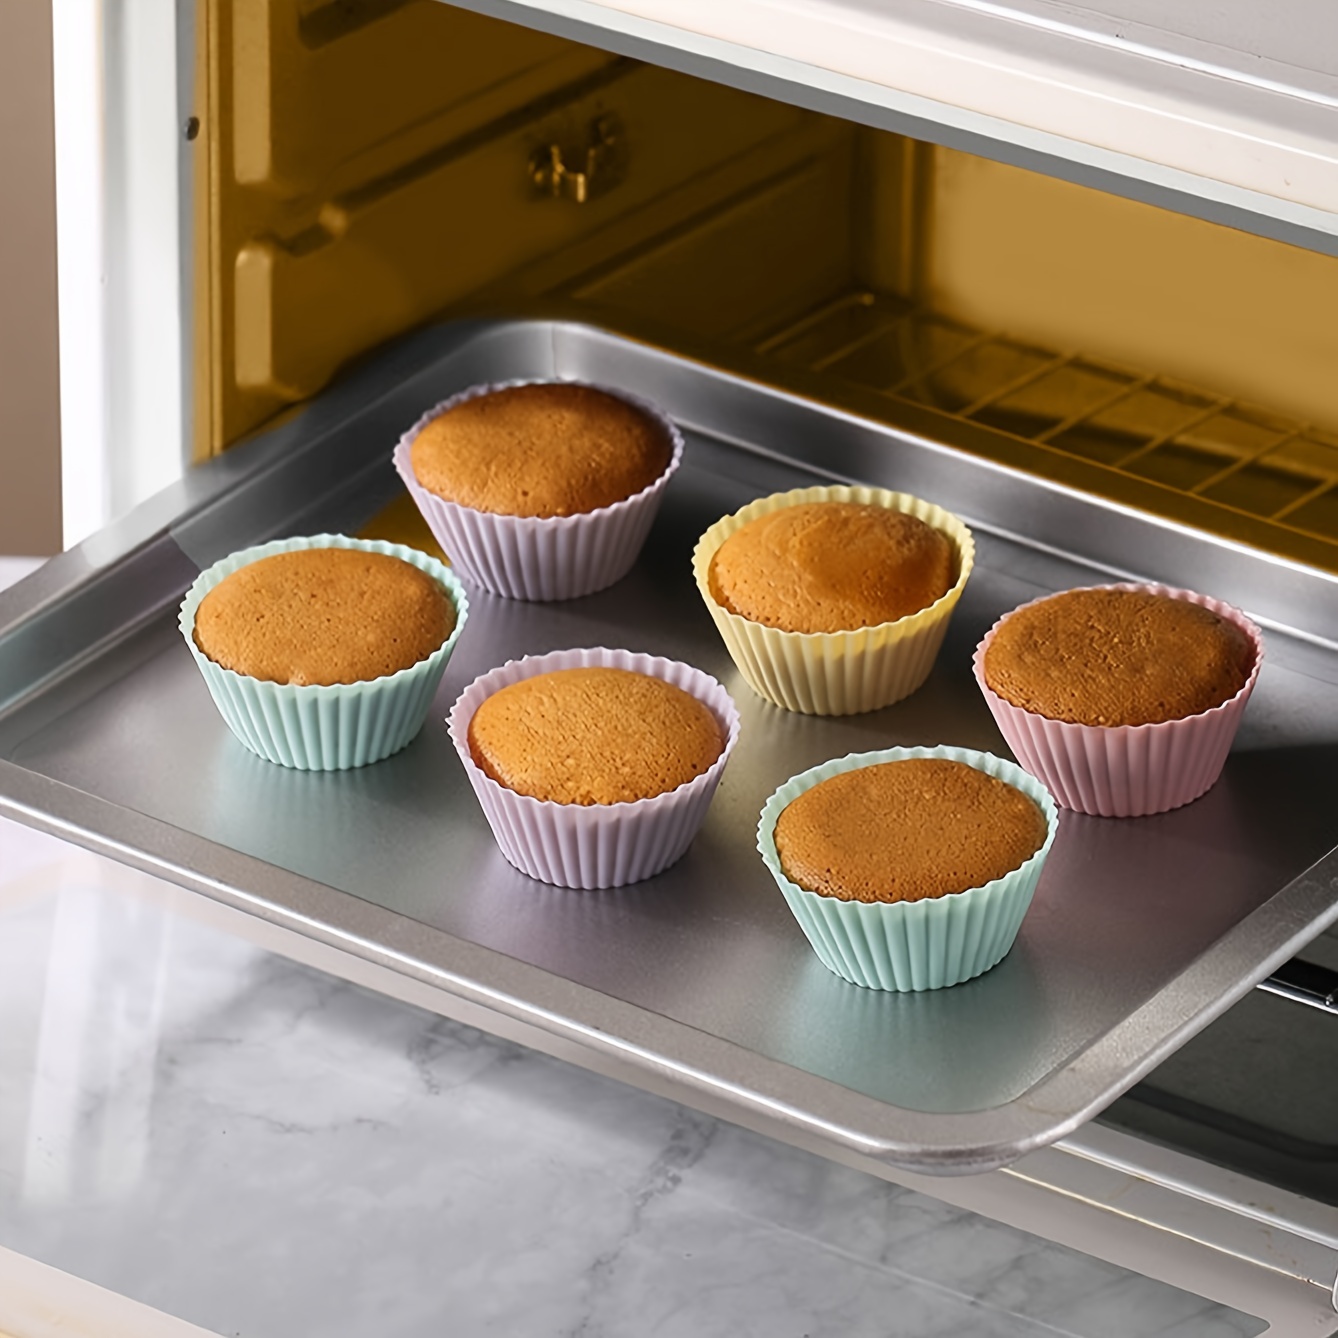 NOGIS Rectangular Jumbo Cupcake Liners, 2.8 Inch Silicone Baking Cups  Reusable Muffin Cups Nonstick Mini Loaf Pan (Pack of 12) 